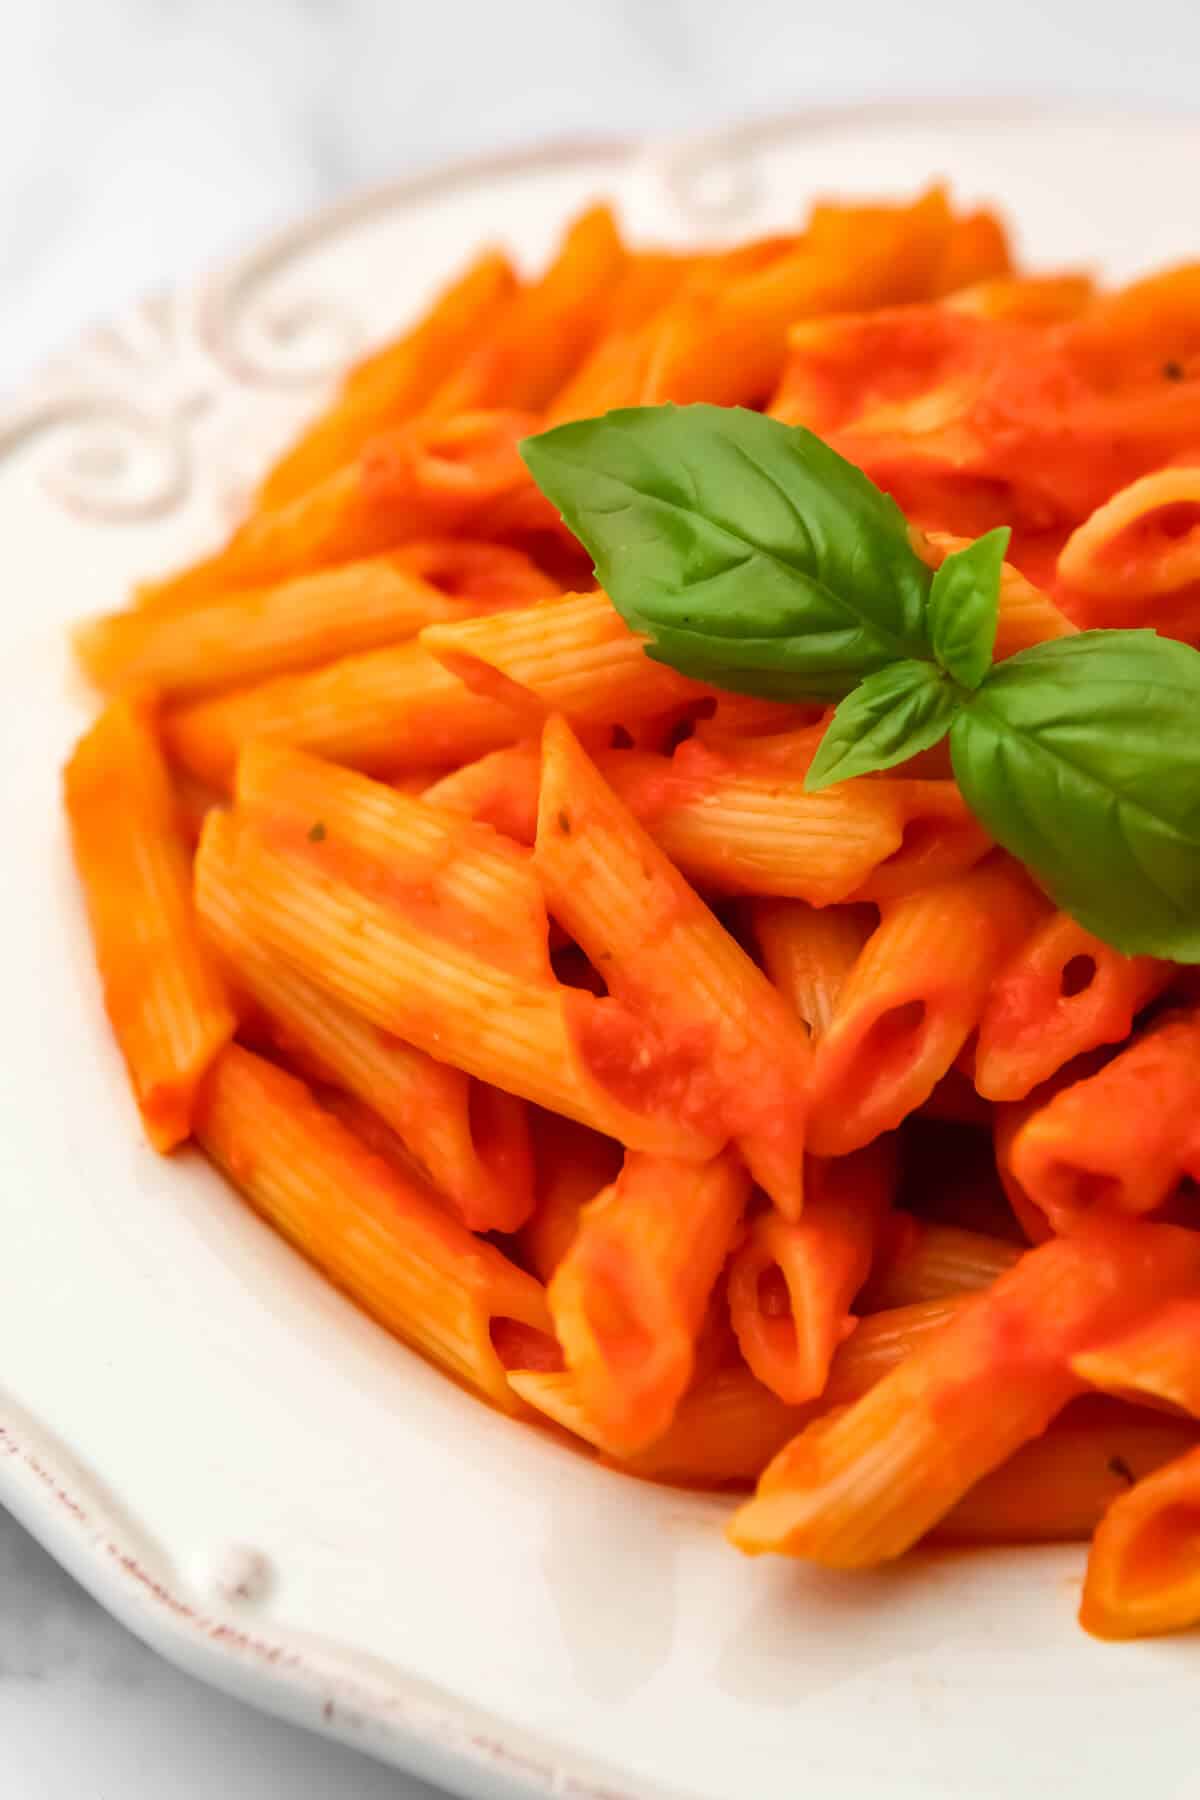 Roasted red pepper and tomato pasta sauce served over pene pasta with basil on top.